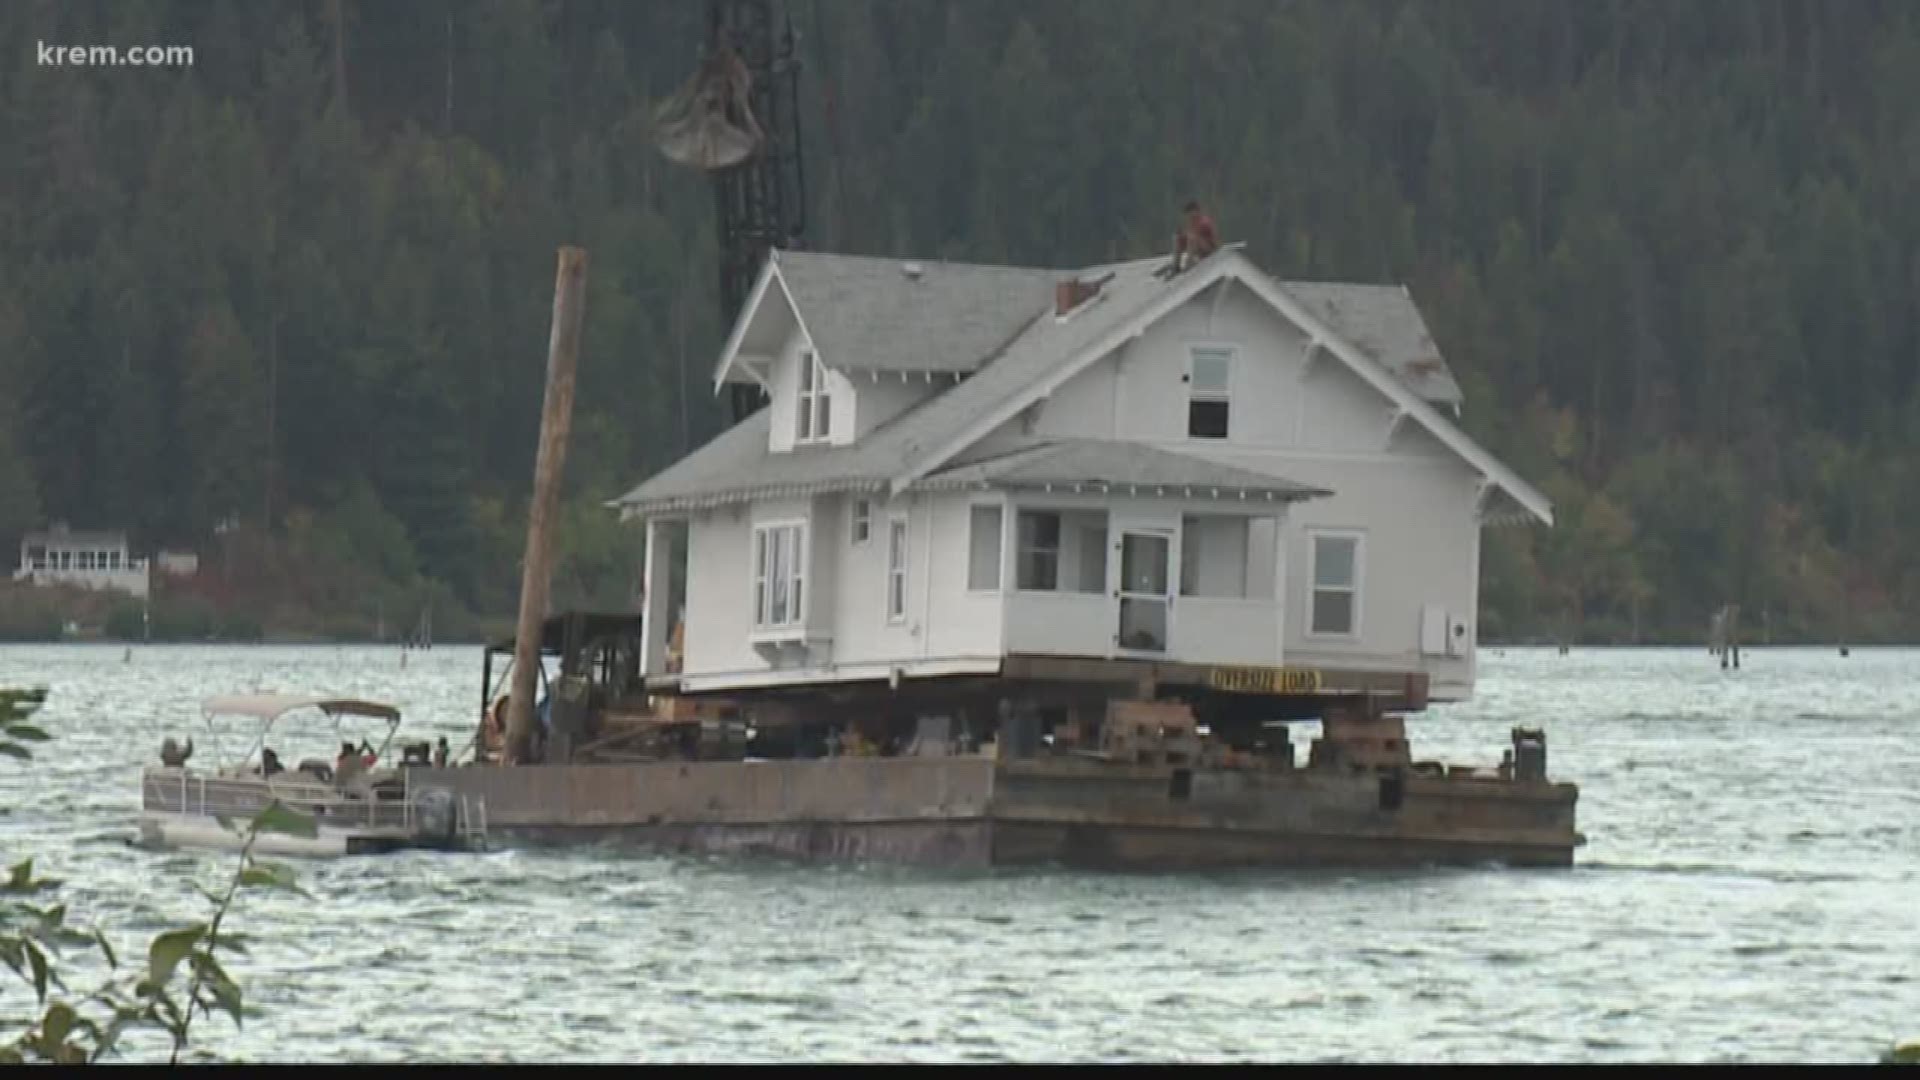 A local businessman bought the 115-year-old home and then was floated the home across the lake to another location.